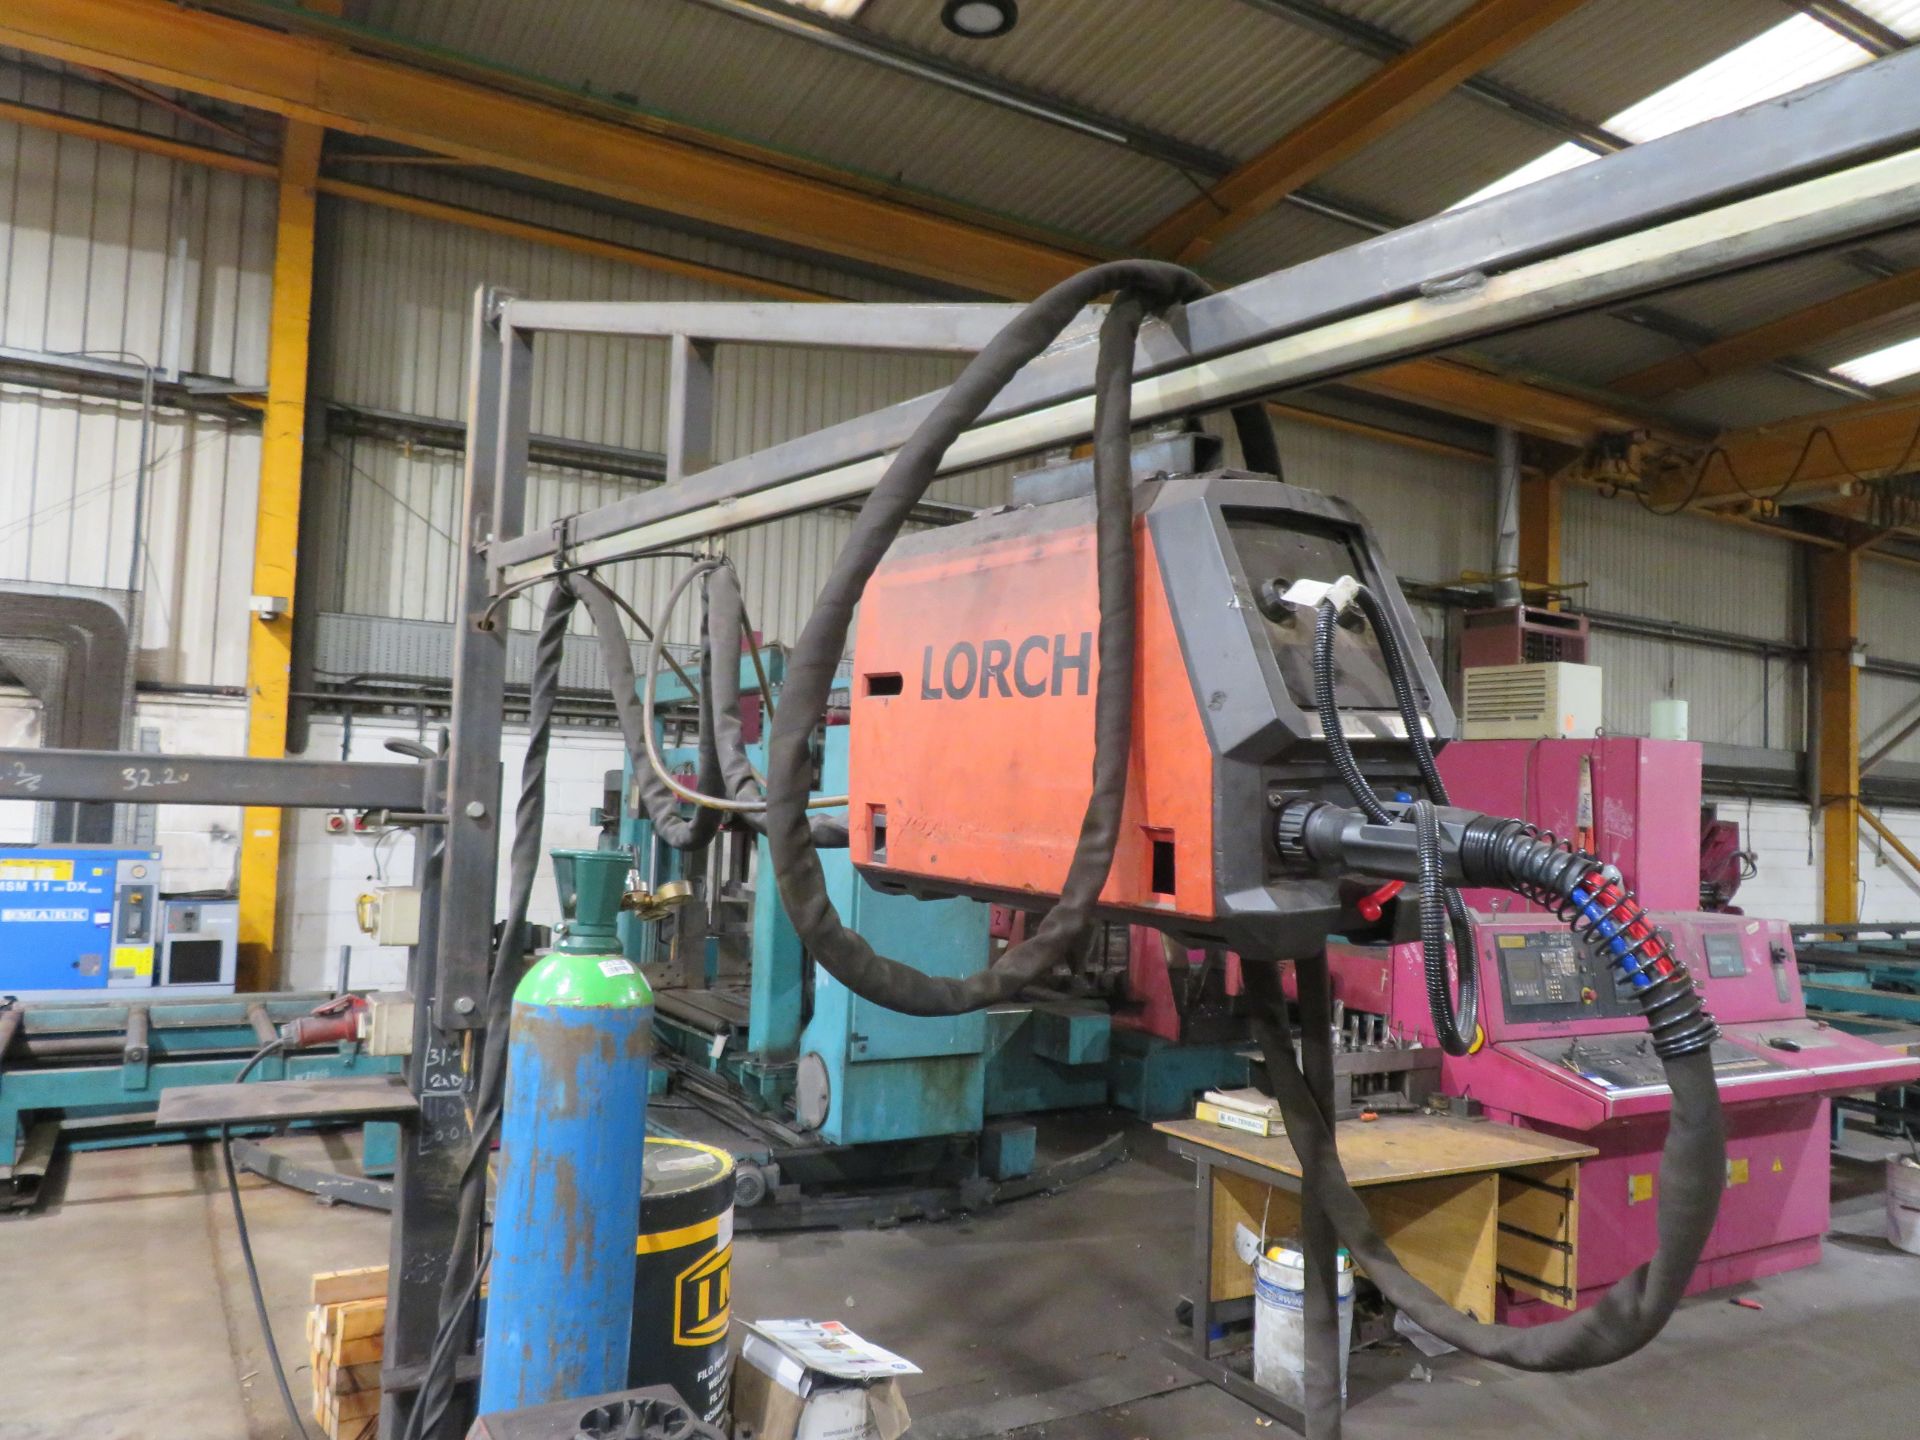 Lorch Micromig 500 welder with wire feed & swing jib (gas bottle not included) - Image 3 of 3